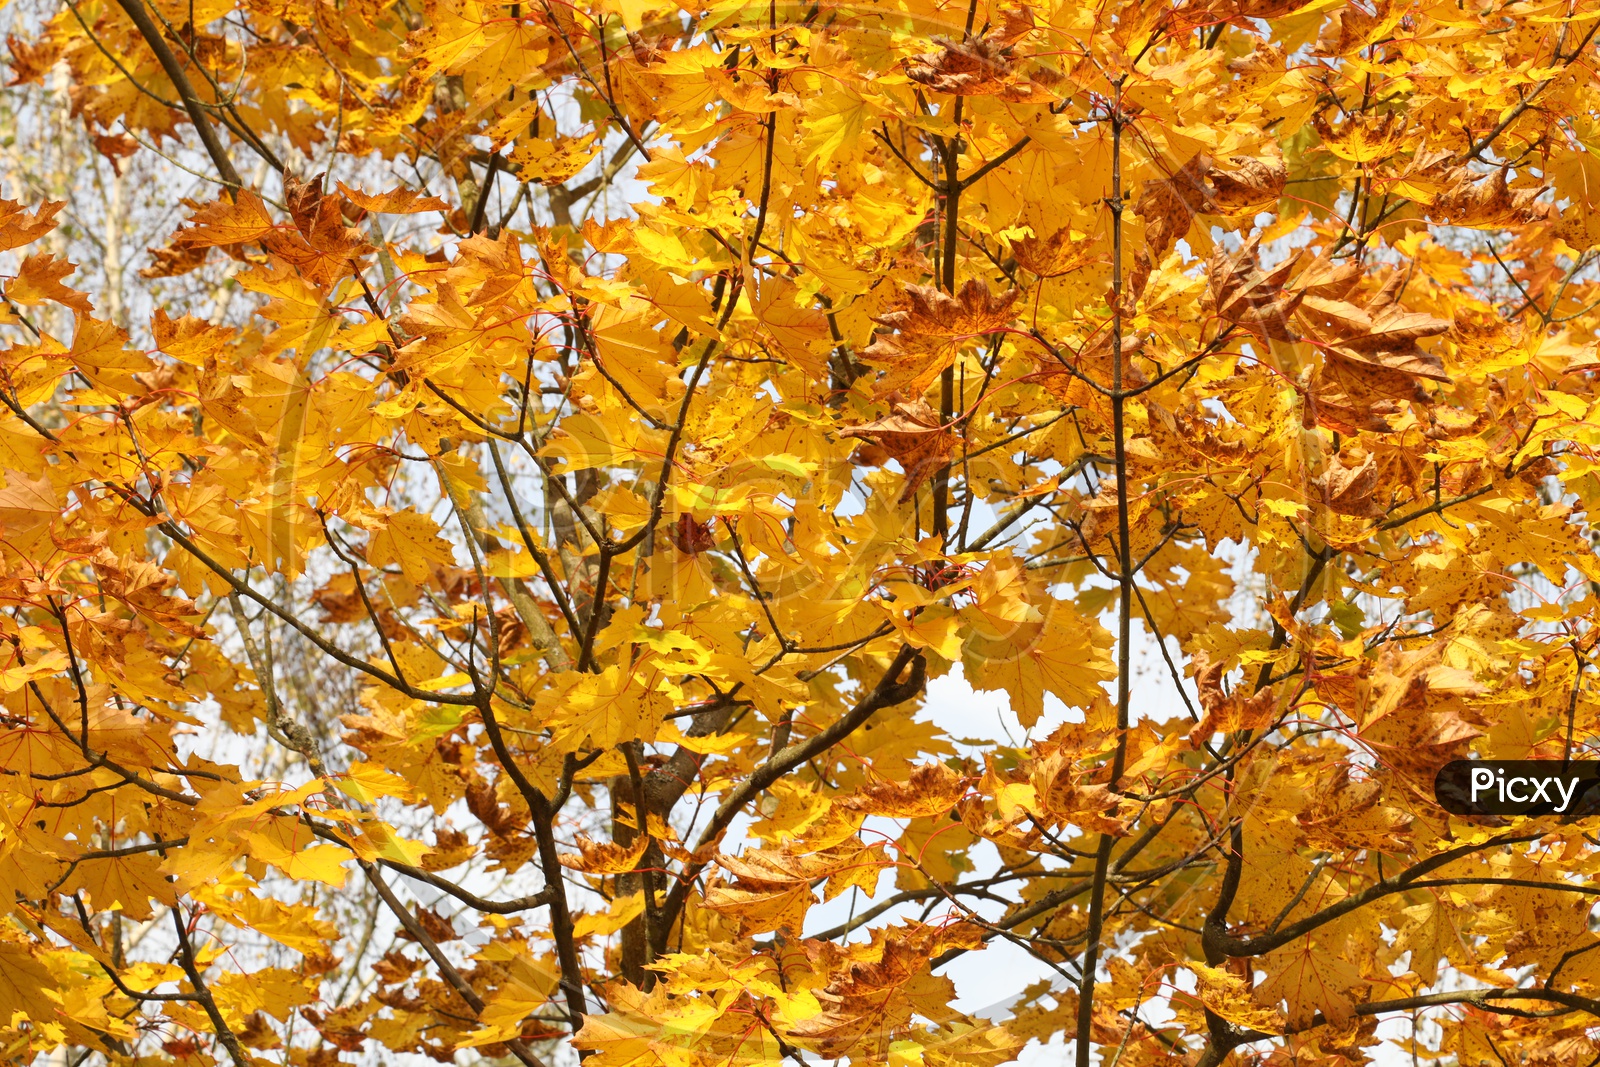 Autumn Maple Tree with yellow leaves